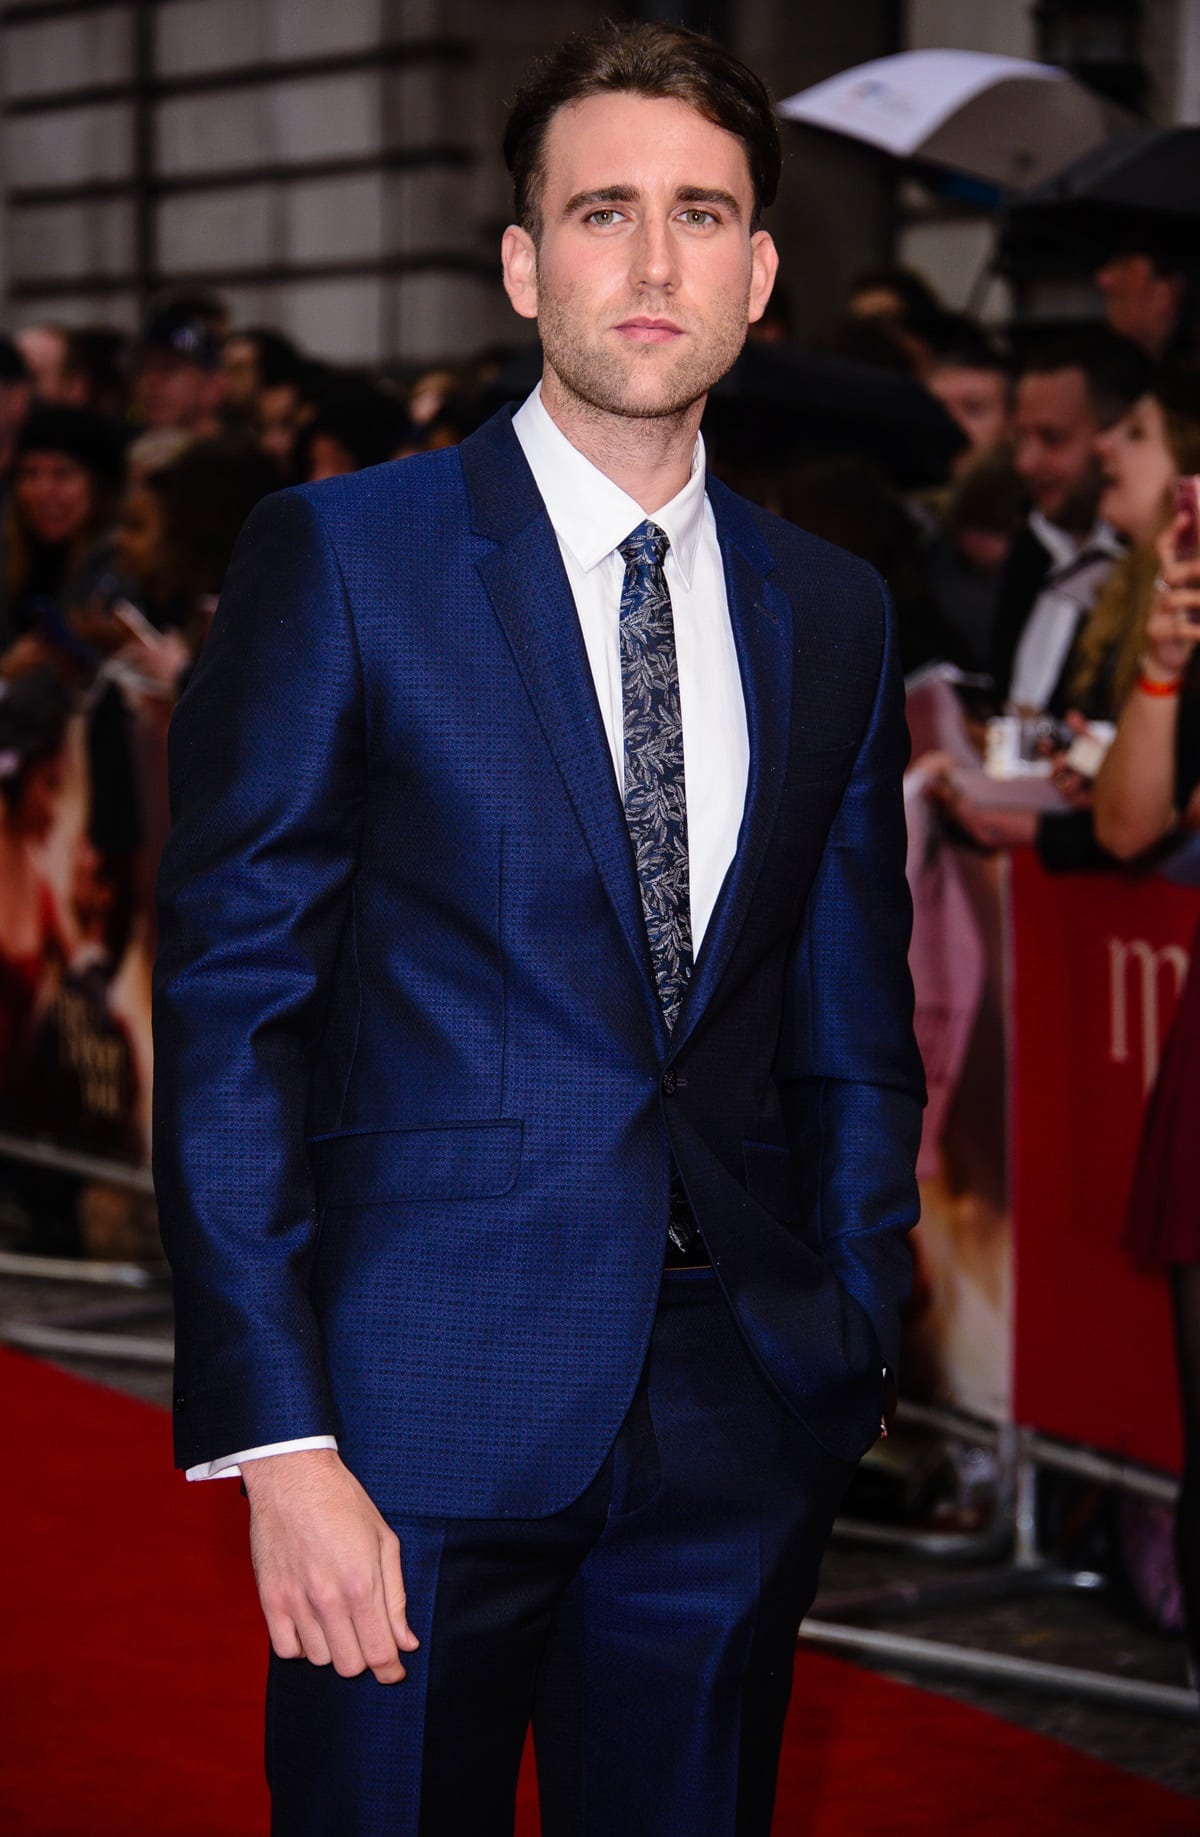 Matthew Lewis, known for his role as Neville Longbottom in the Harry Potter film series, portrayed Patrick in Me Before You